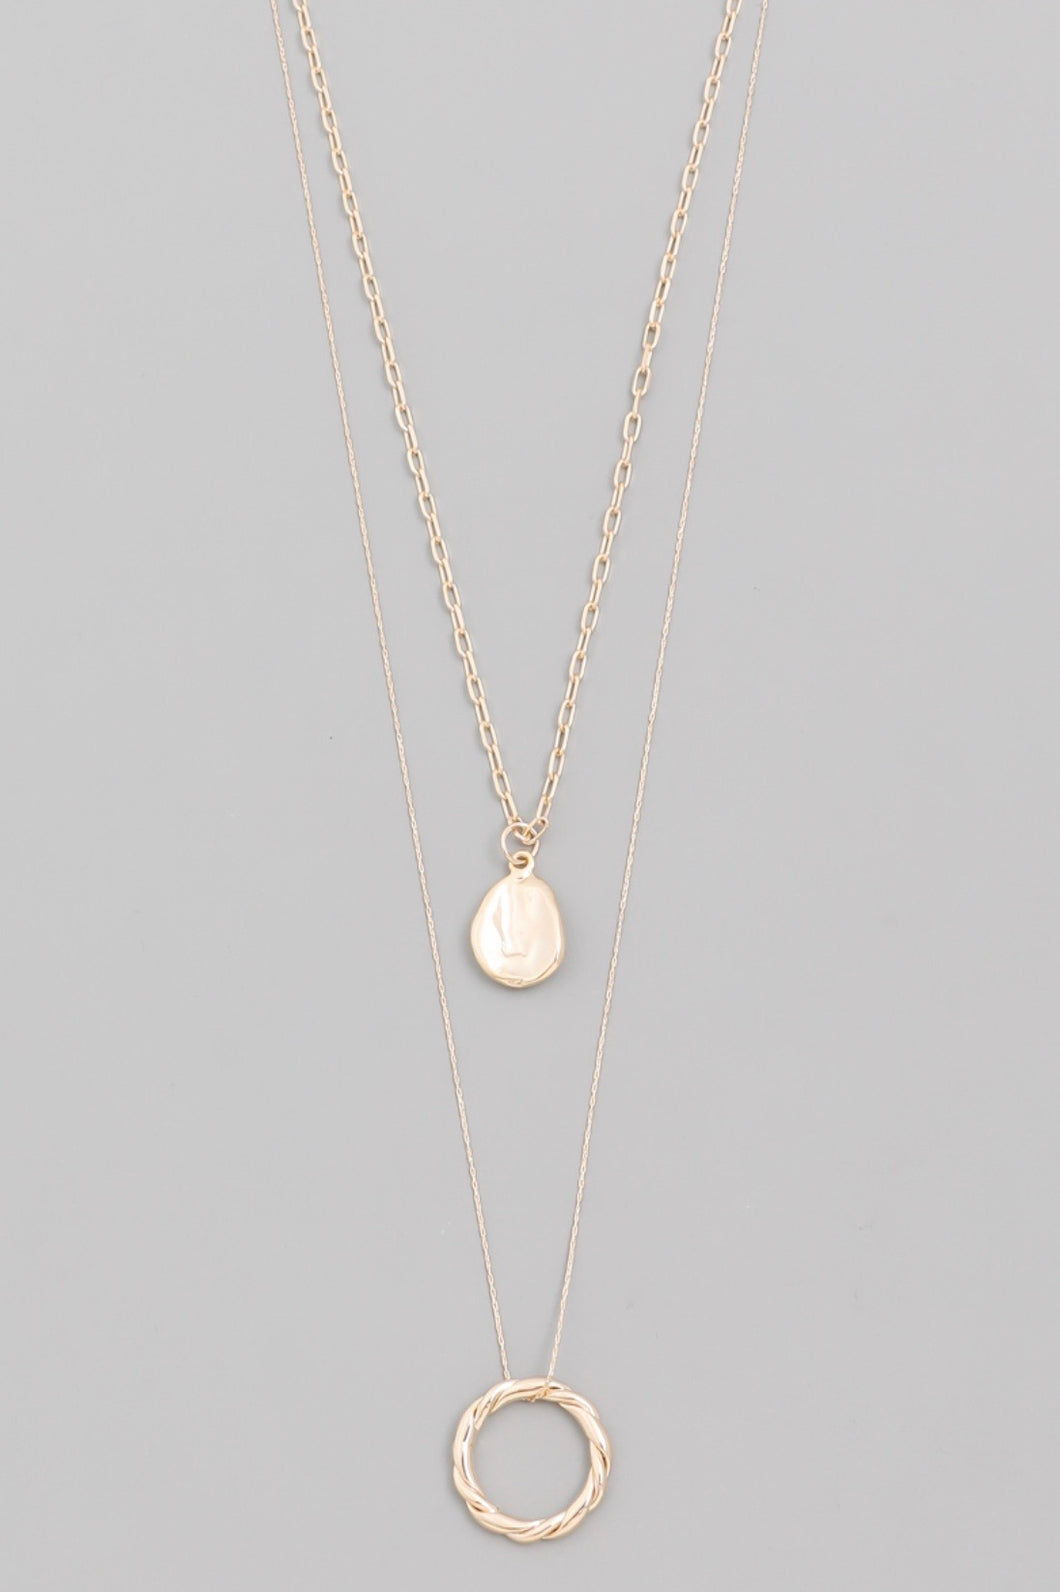 Dainty Layered Circle Charm Necklace